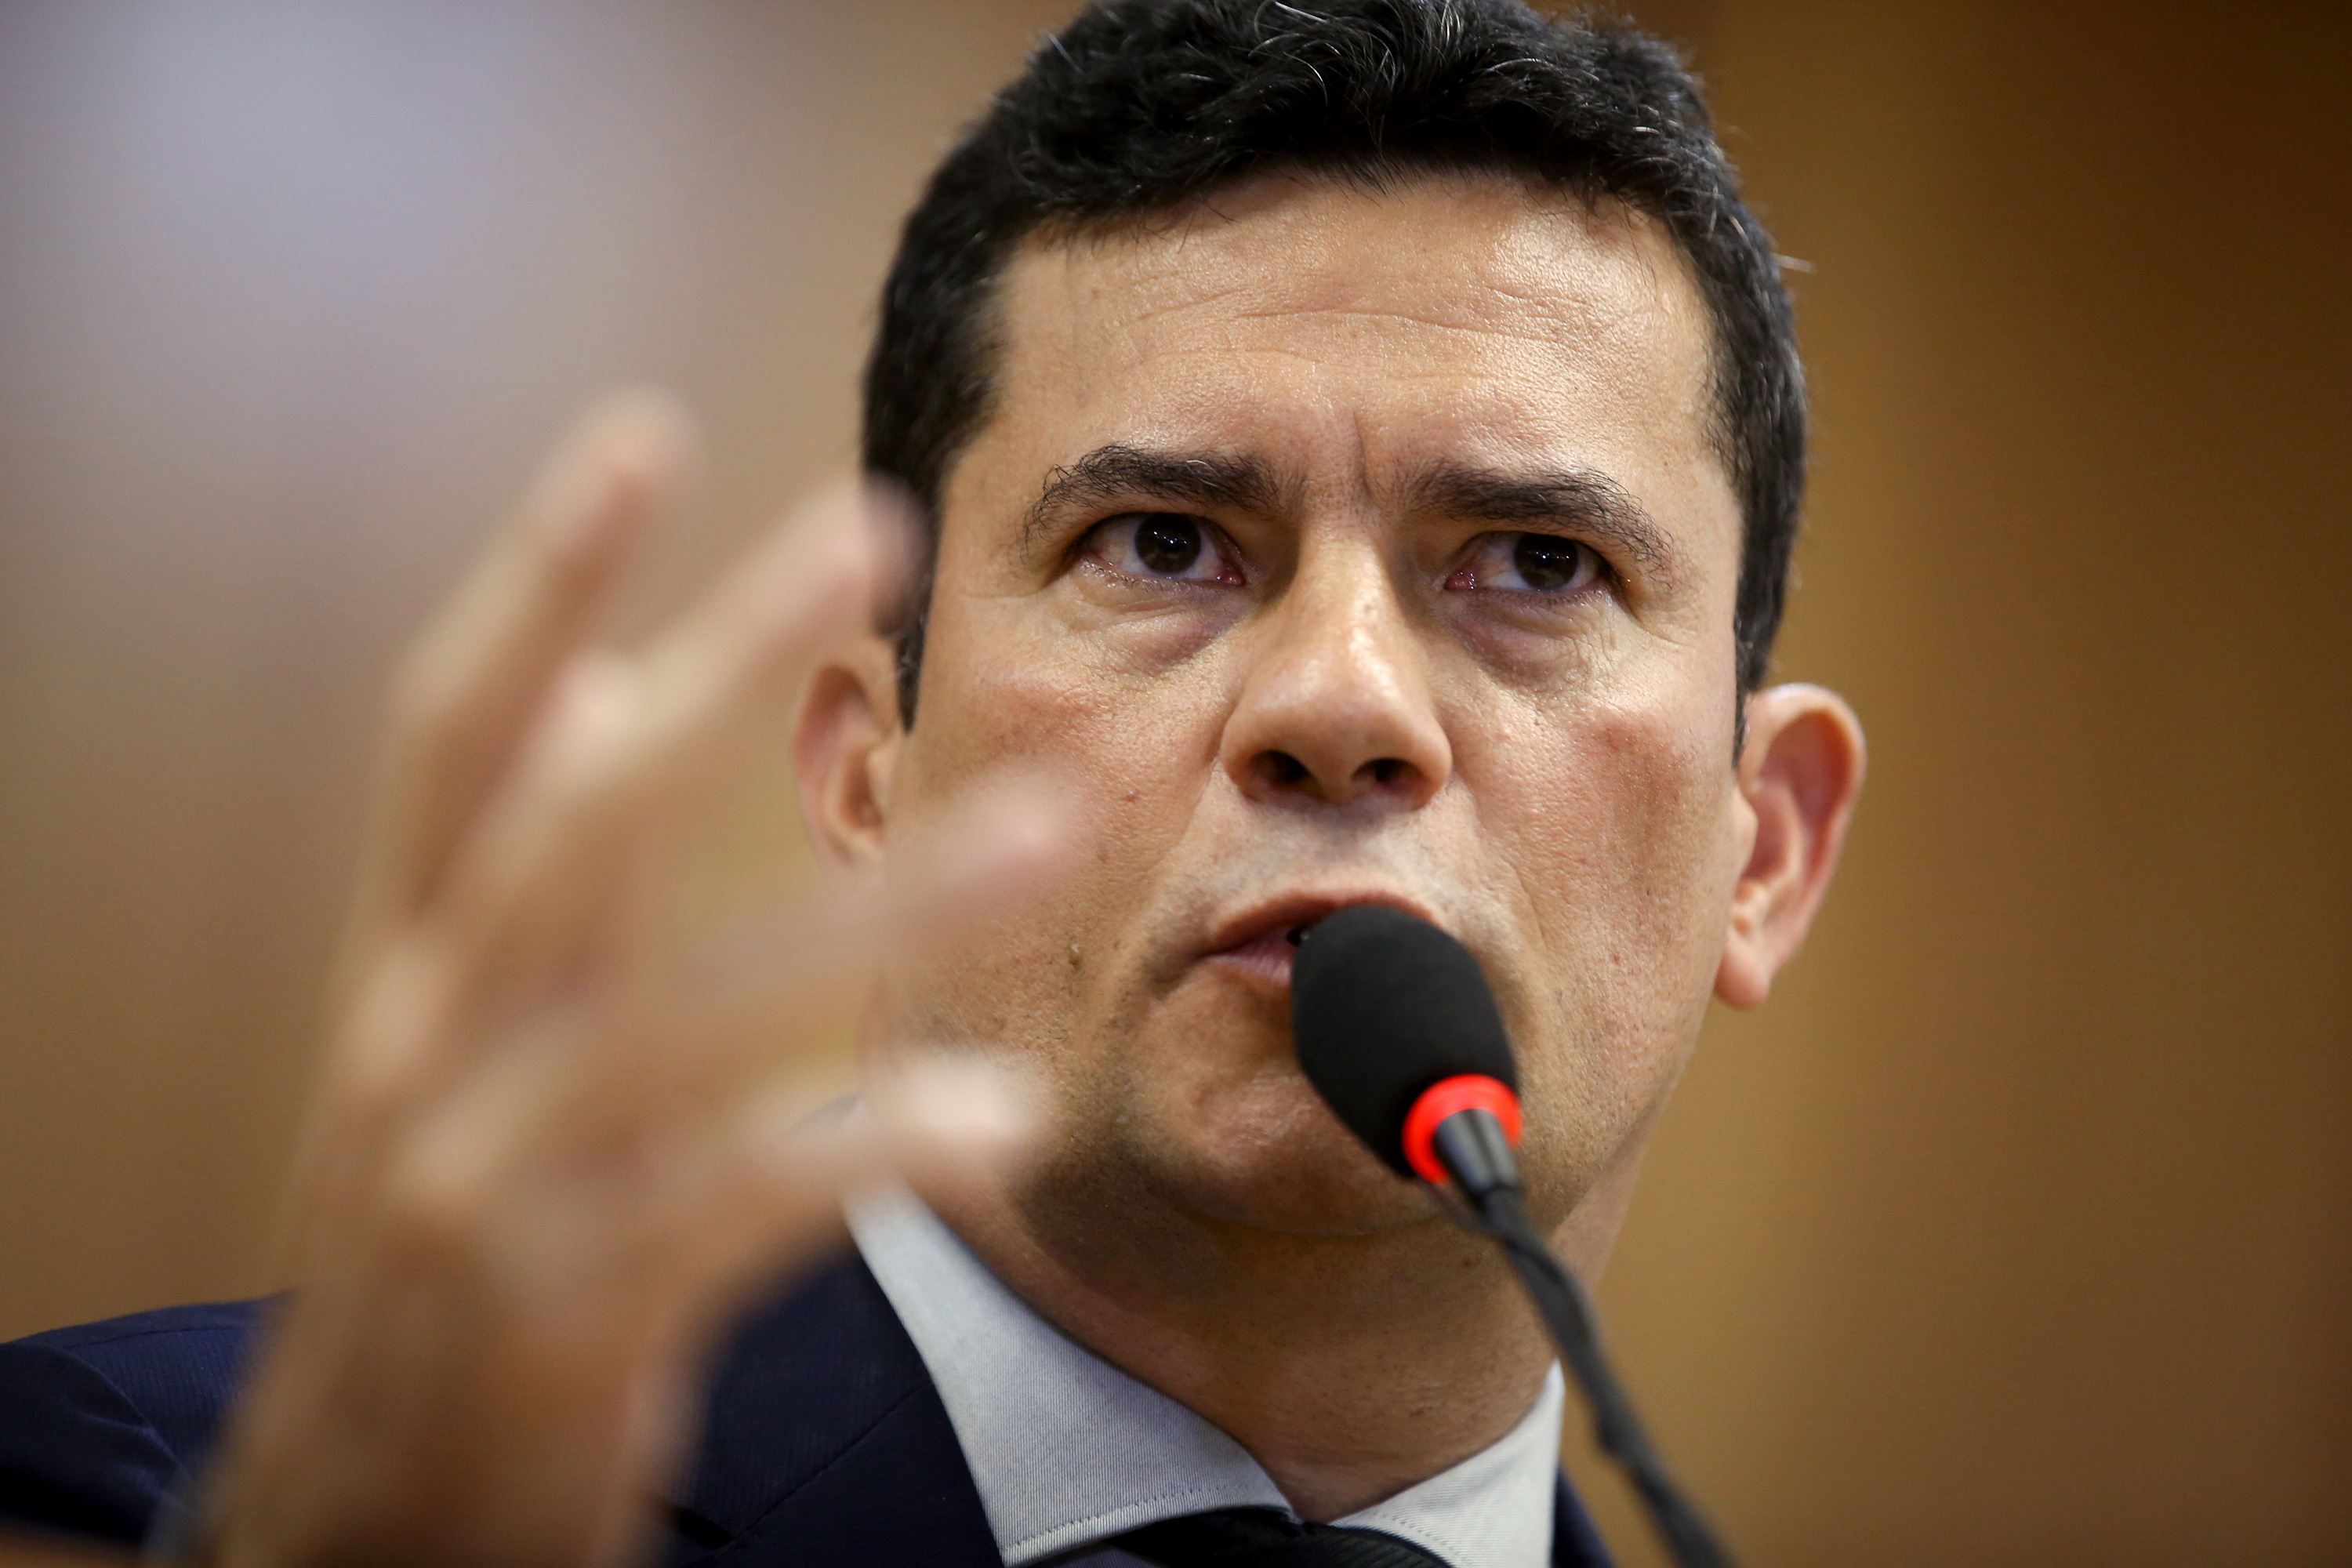 Sergio Moro, Brazil's minister of Justice, speaks during a news conference in Brasilia, Brazil, on Monday, Feb. 4, 2019. Moro announced tougher measures to overhaul crime. Photographer: Andre Coelho/Bloomberg via Getty Images